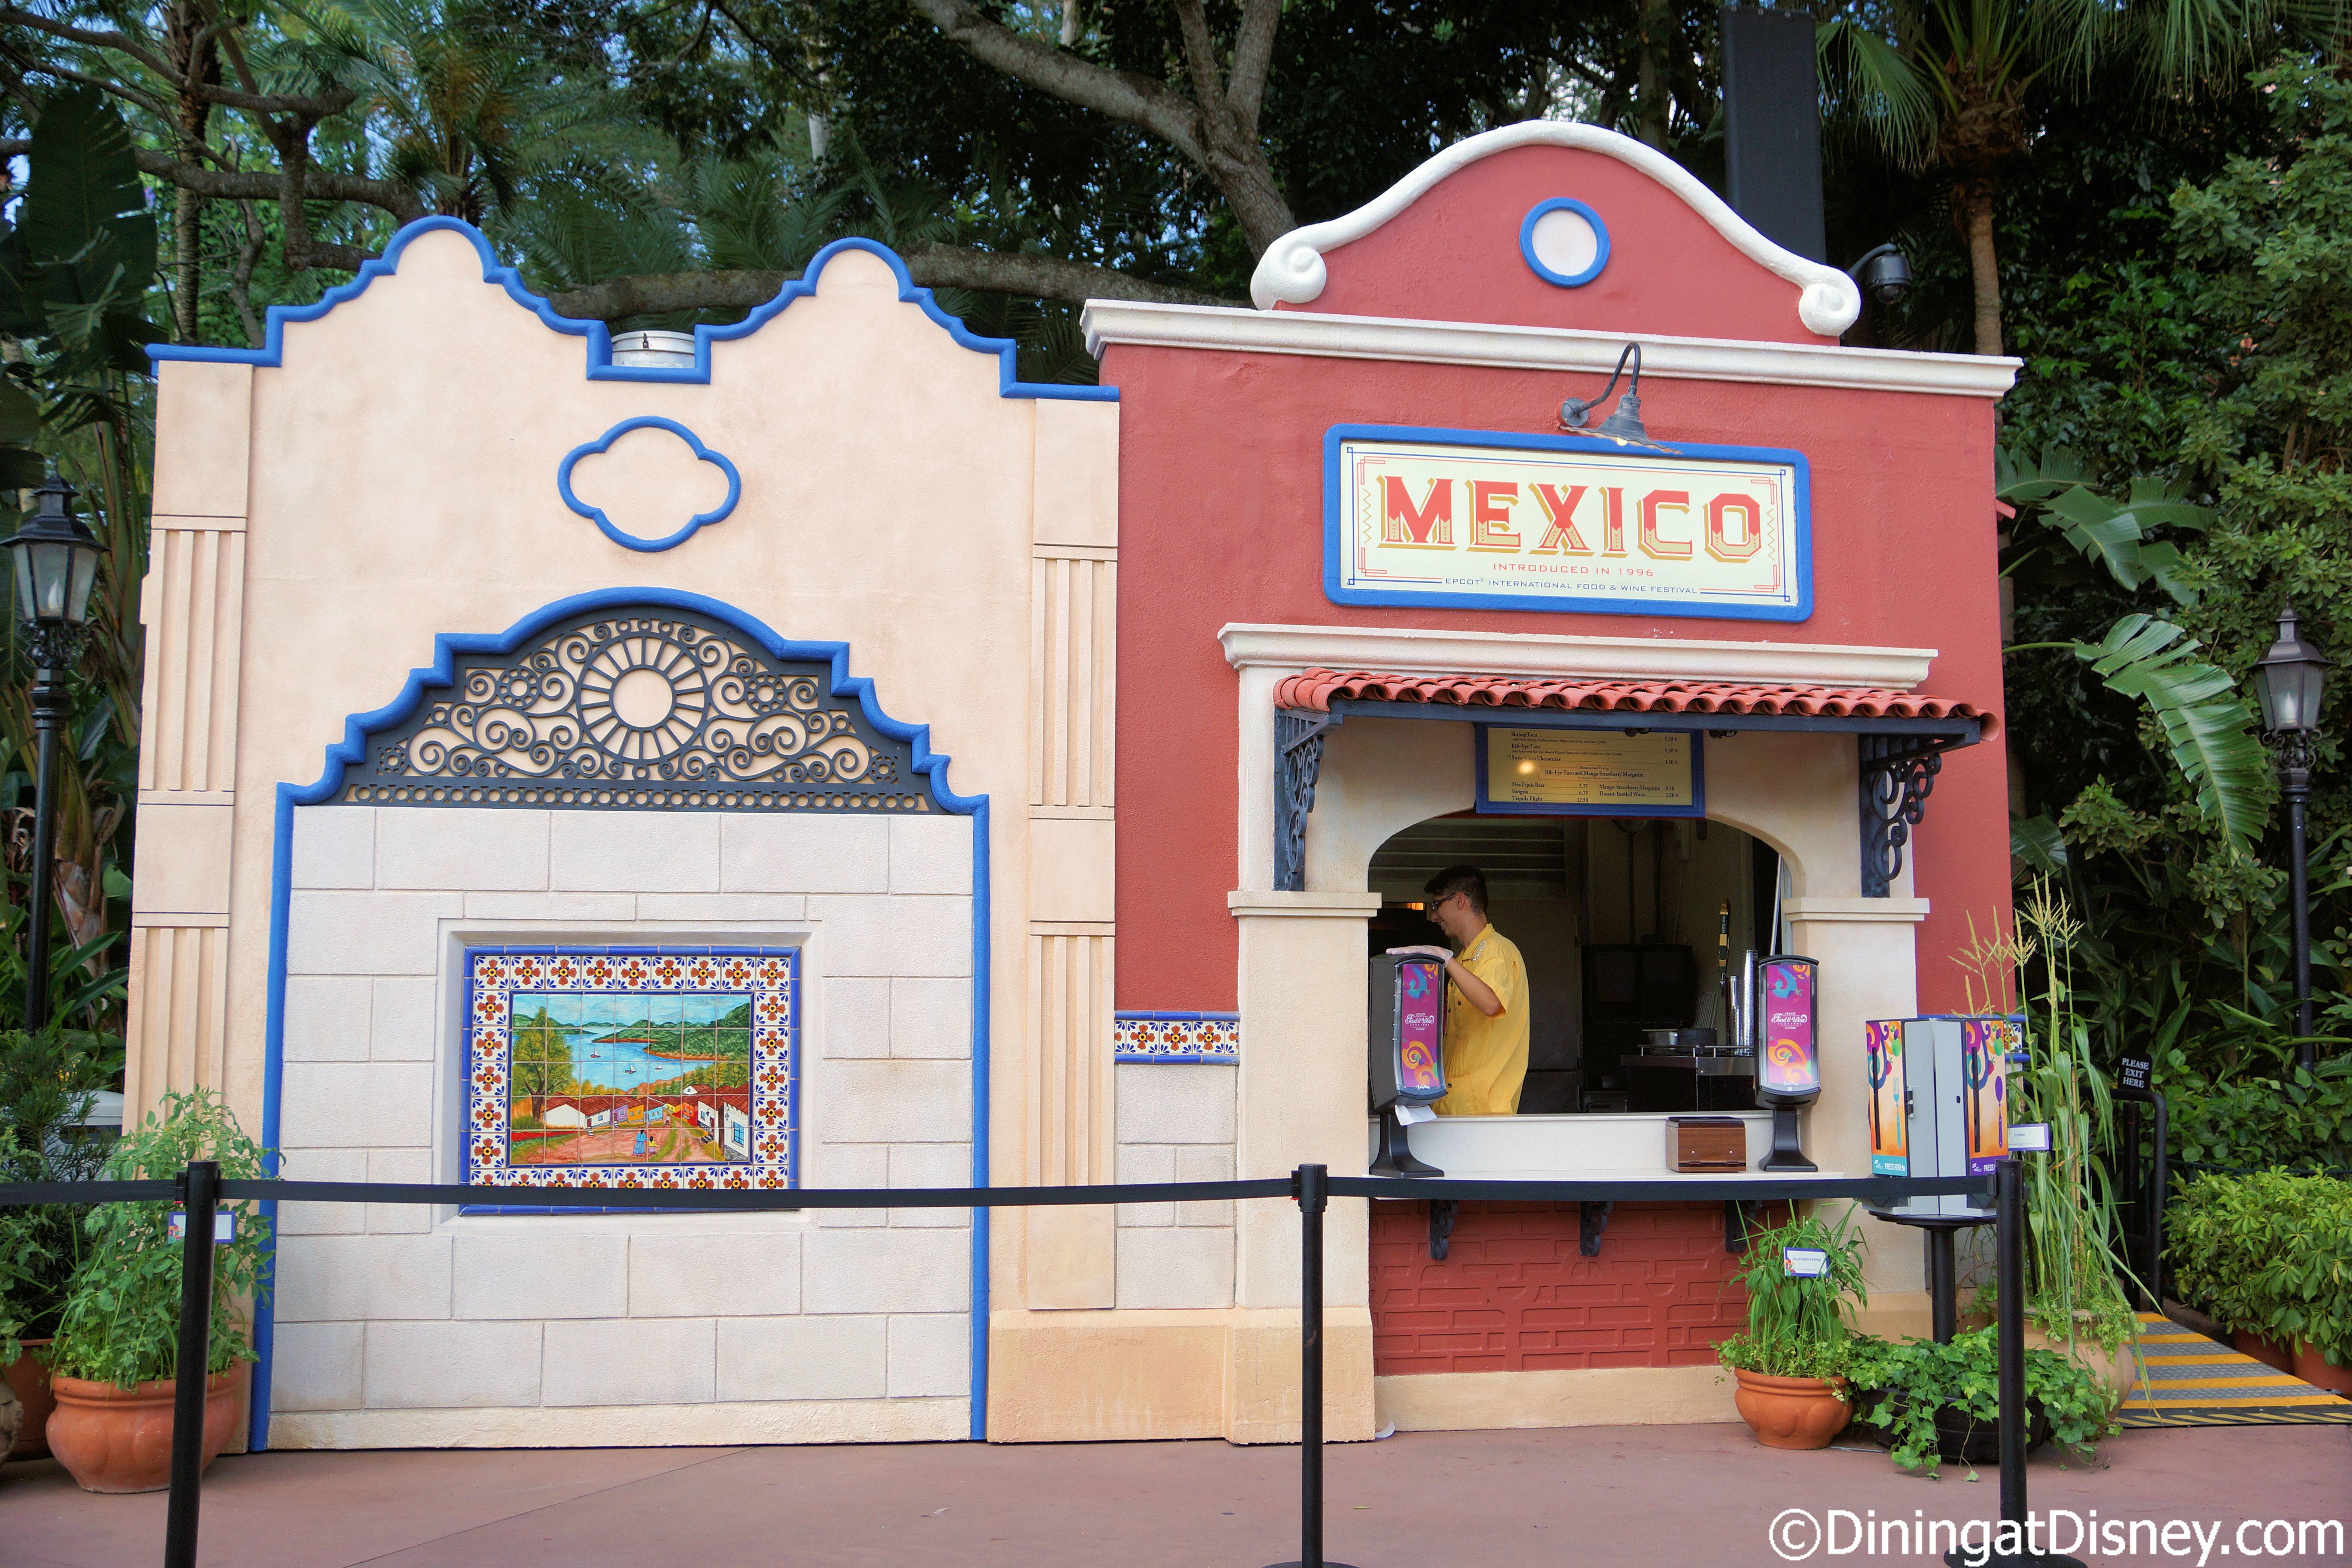 The Mexico booth at the 2014 Epcot Food and Wine Festival